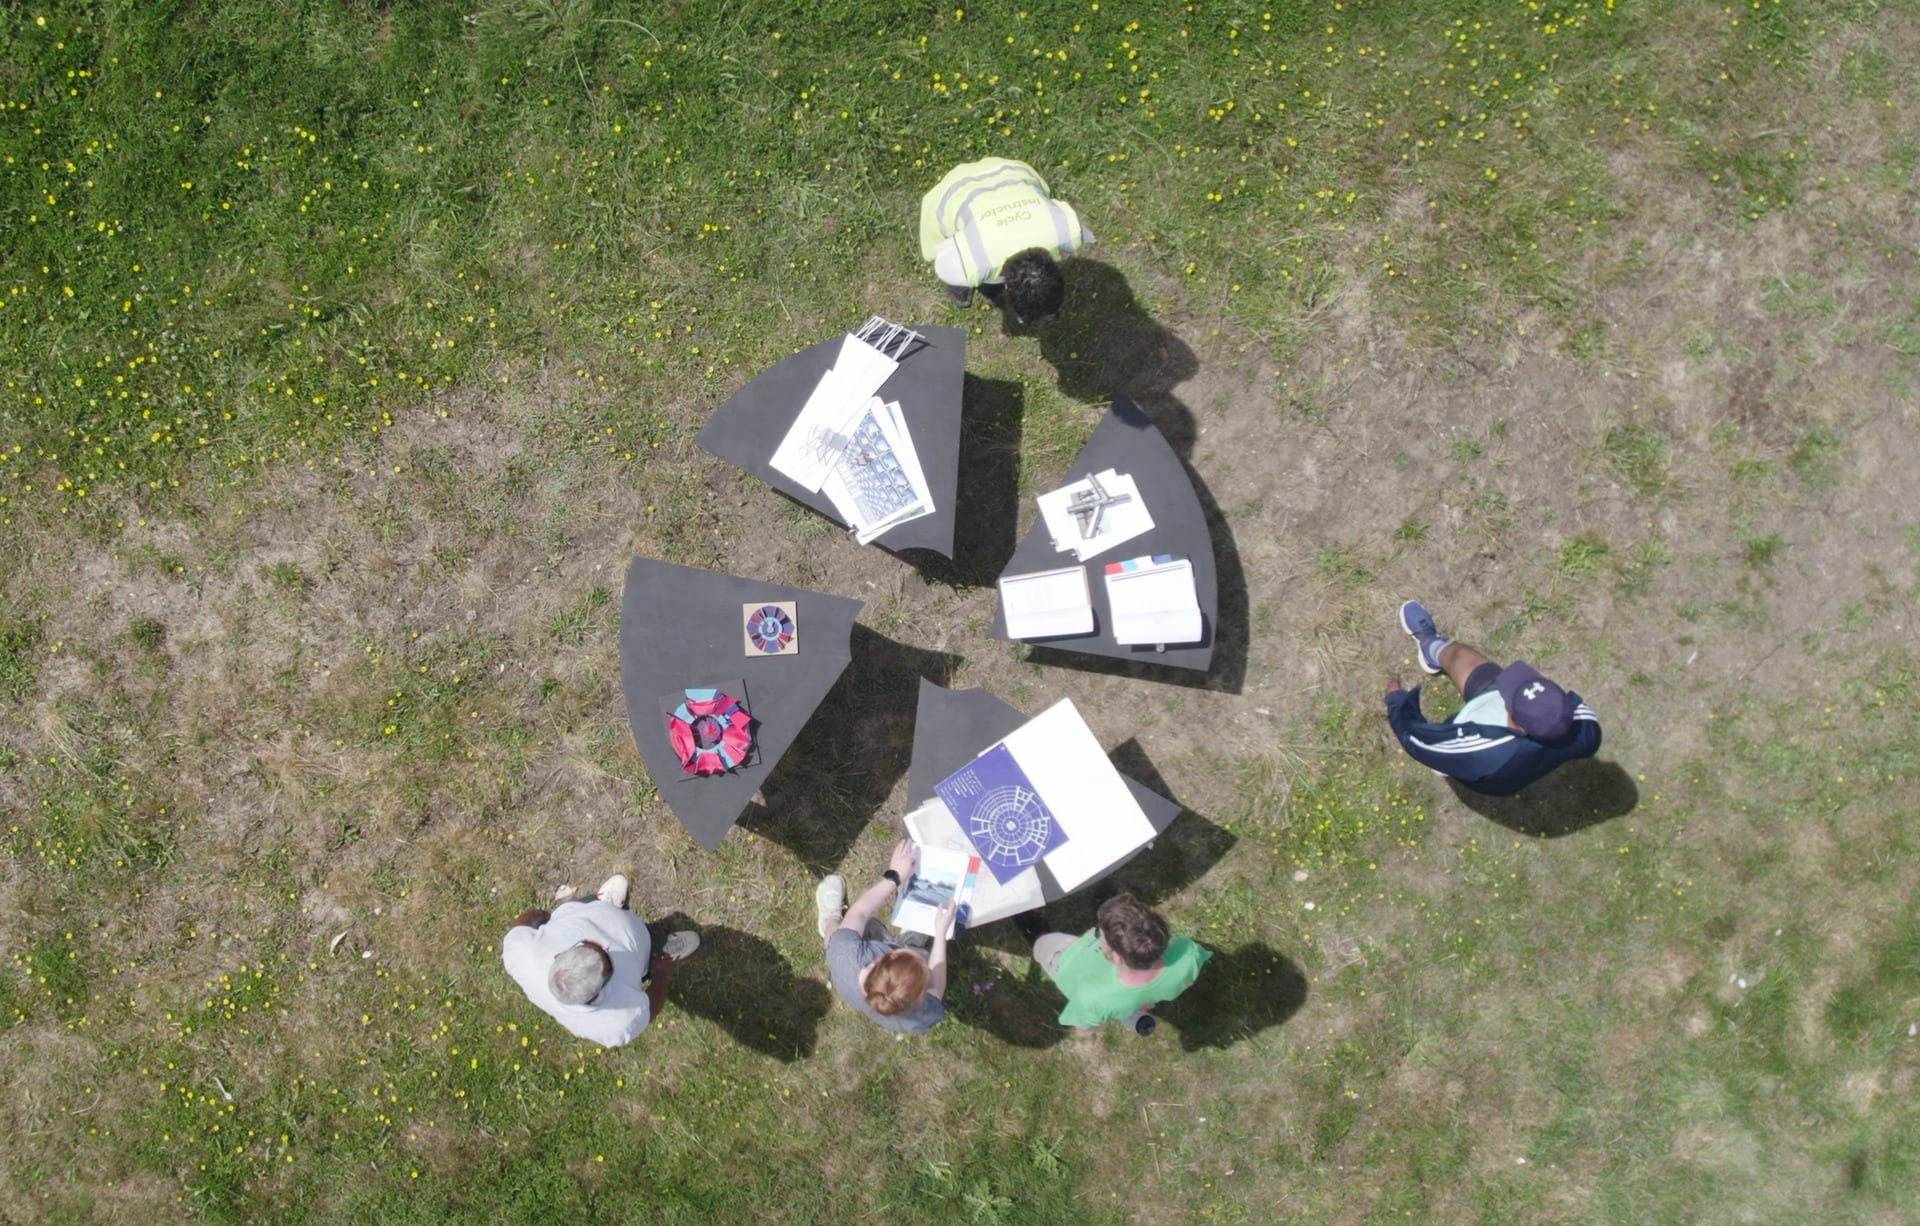 Aerial photograph of four people and four wedge shaped tables of various heights, which have papers on them, in a grassy space.